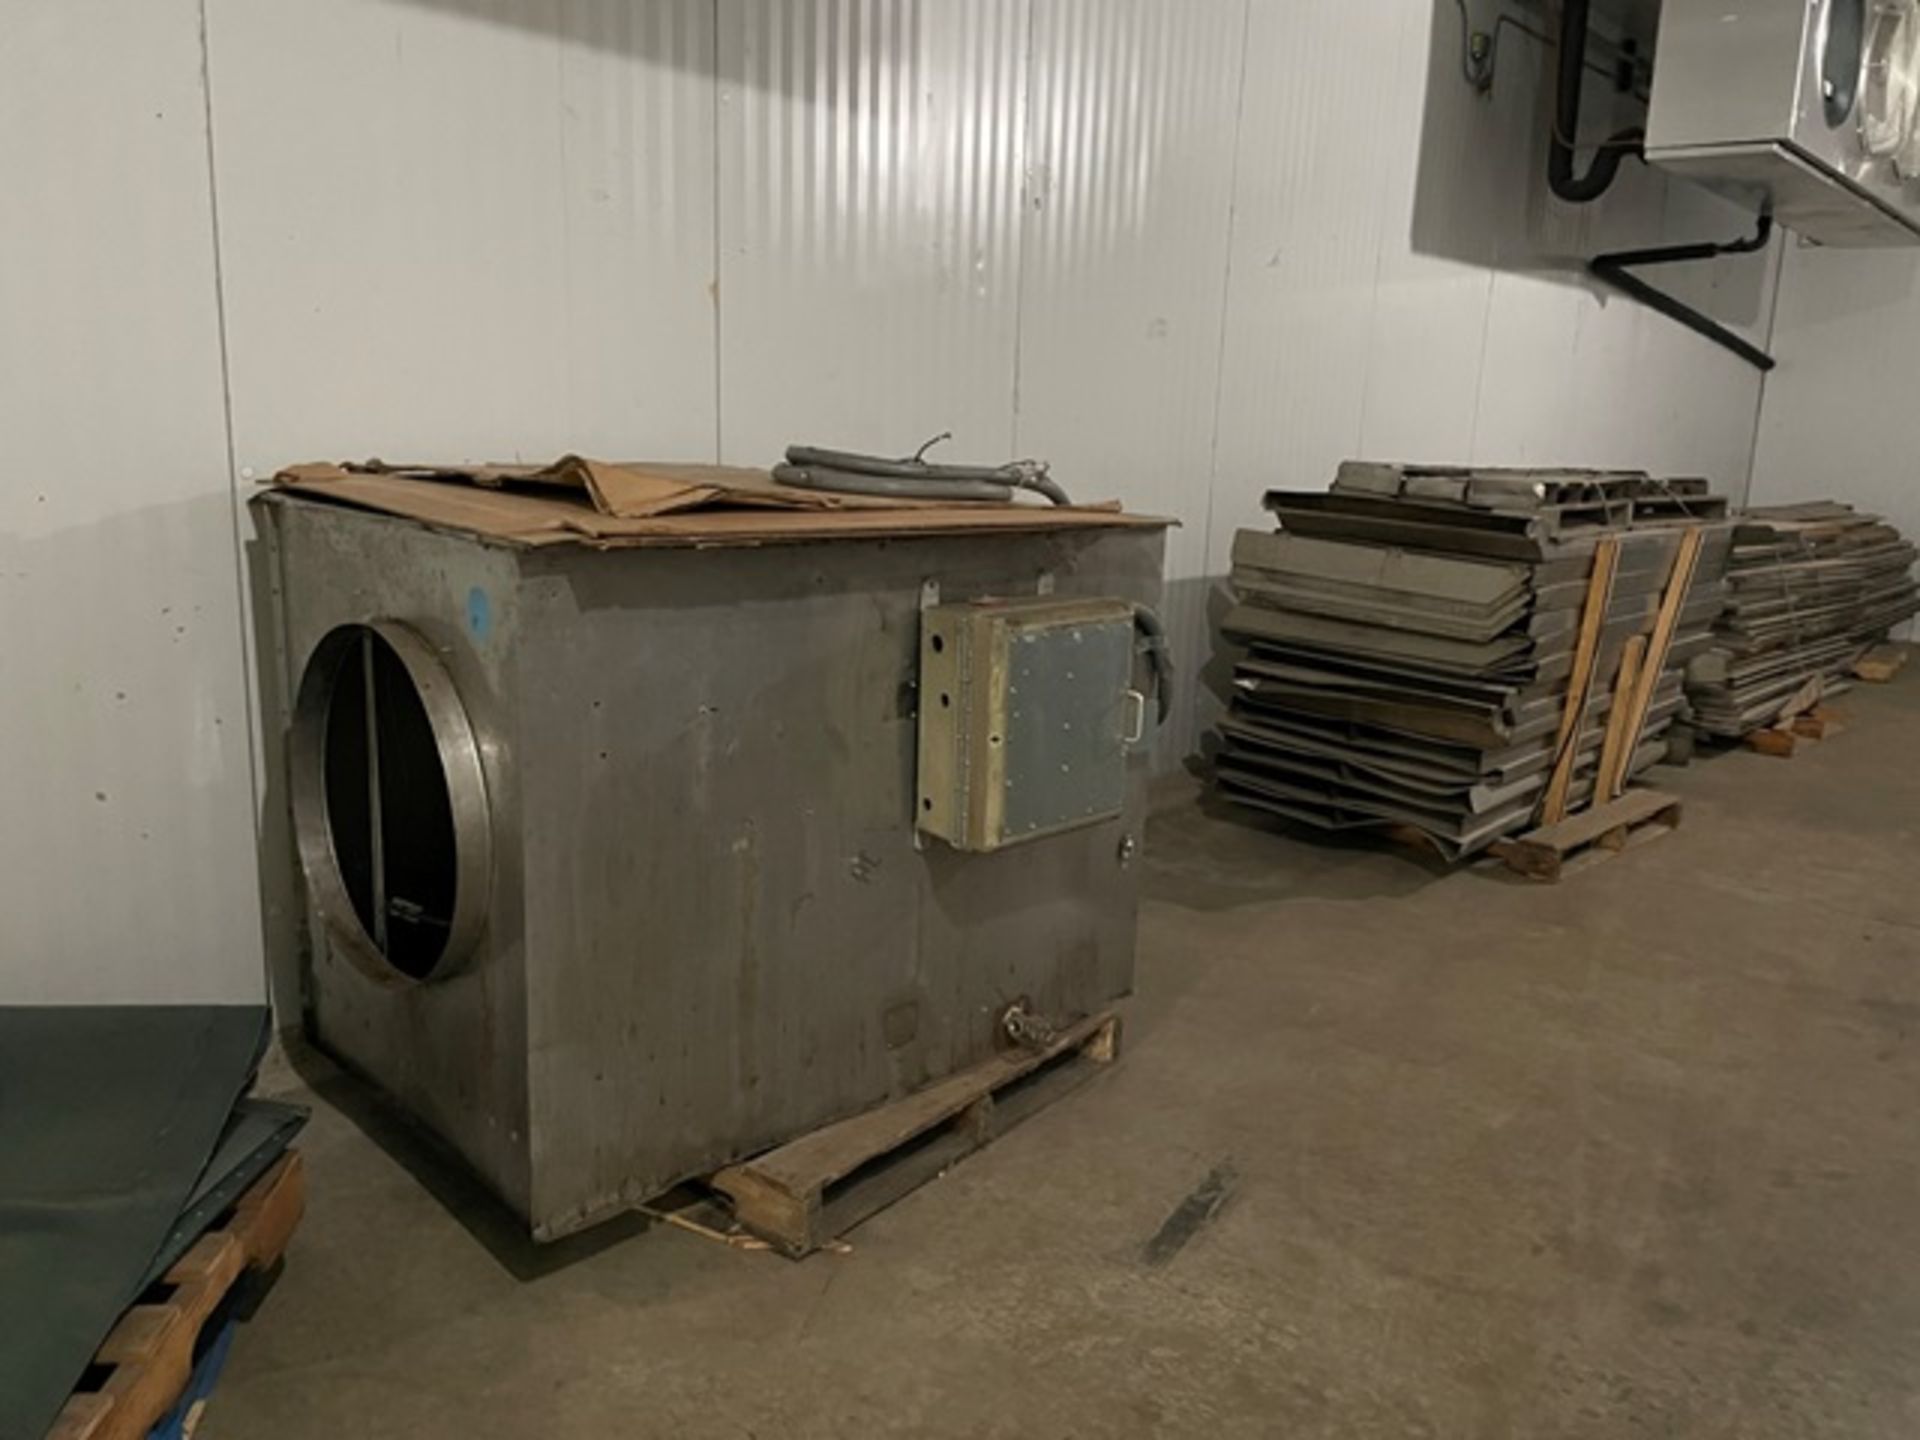 Hartzell Electric Proof Box, 6-Door, Approx. 20' Length (Disassembled, Ready to Ship) - Image 2 of 4